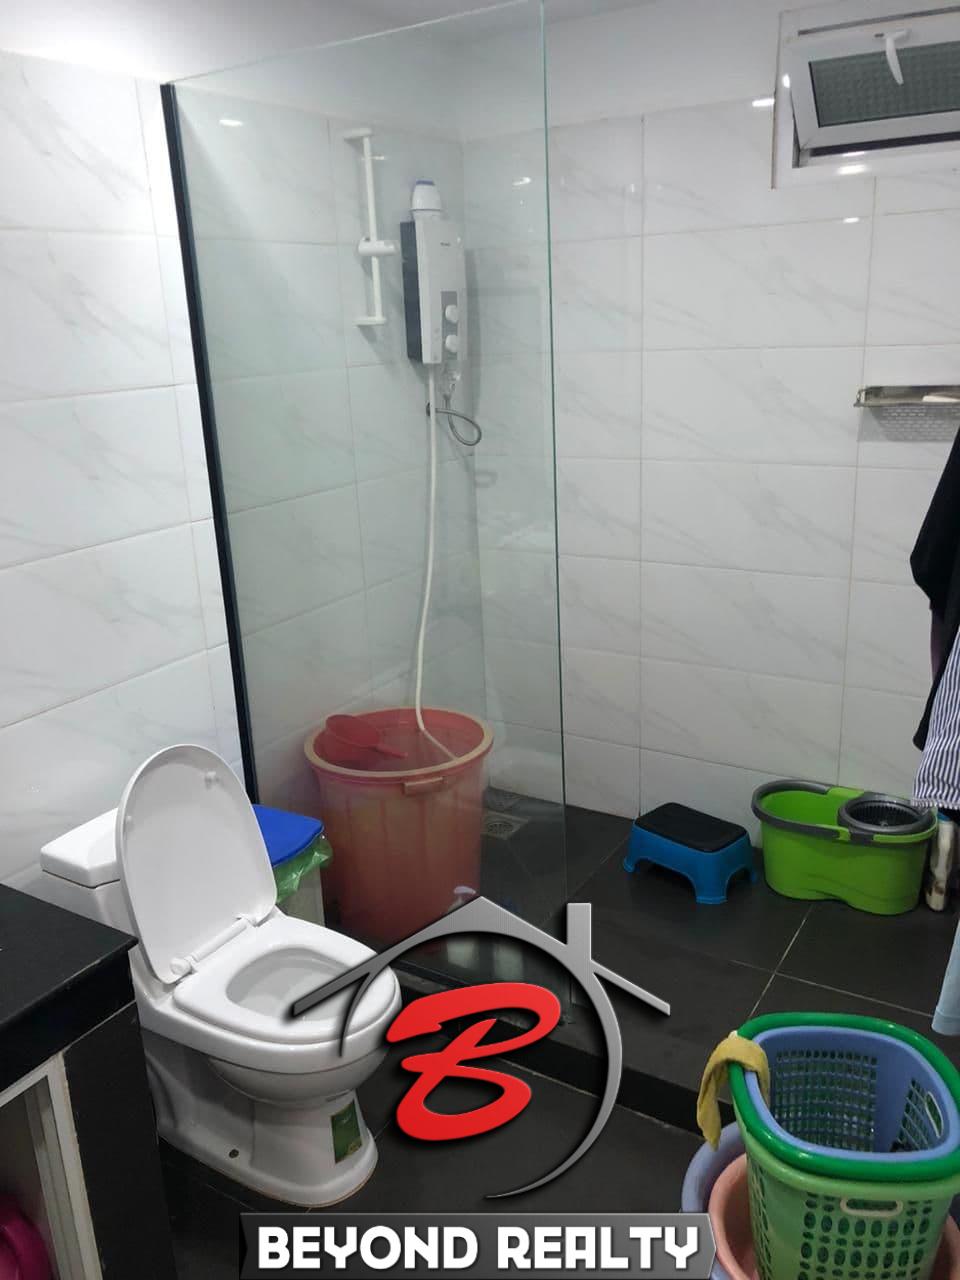 the bathroom of the resale 1-bedroom condo for sale at Cvik Apartments 2 in Sangkat 4 in Sihanoukville